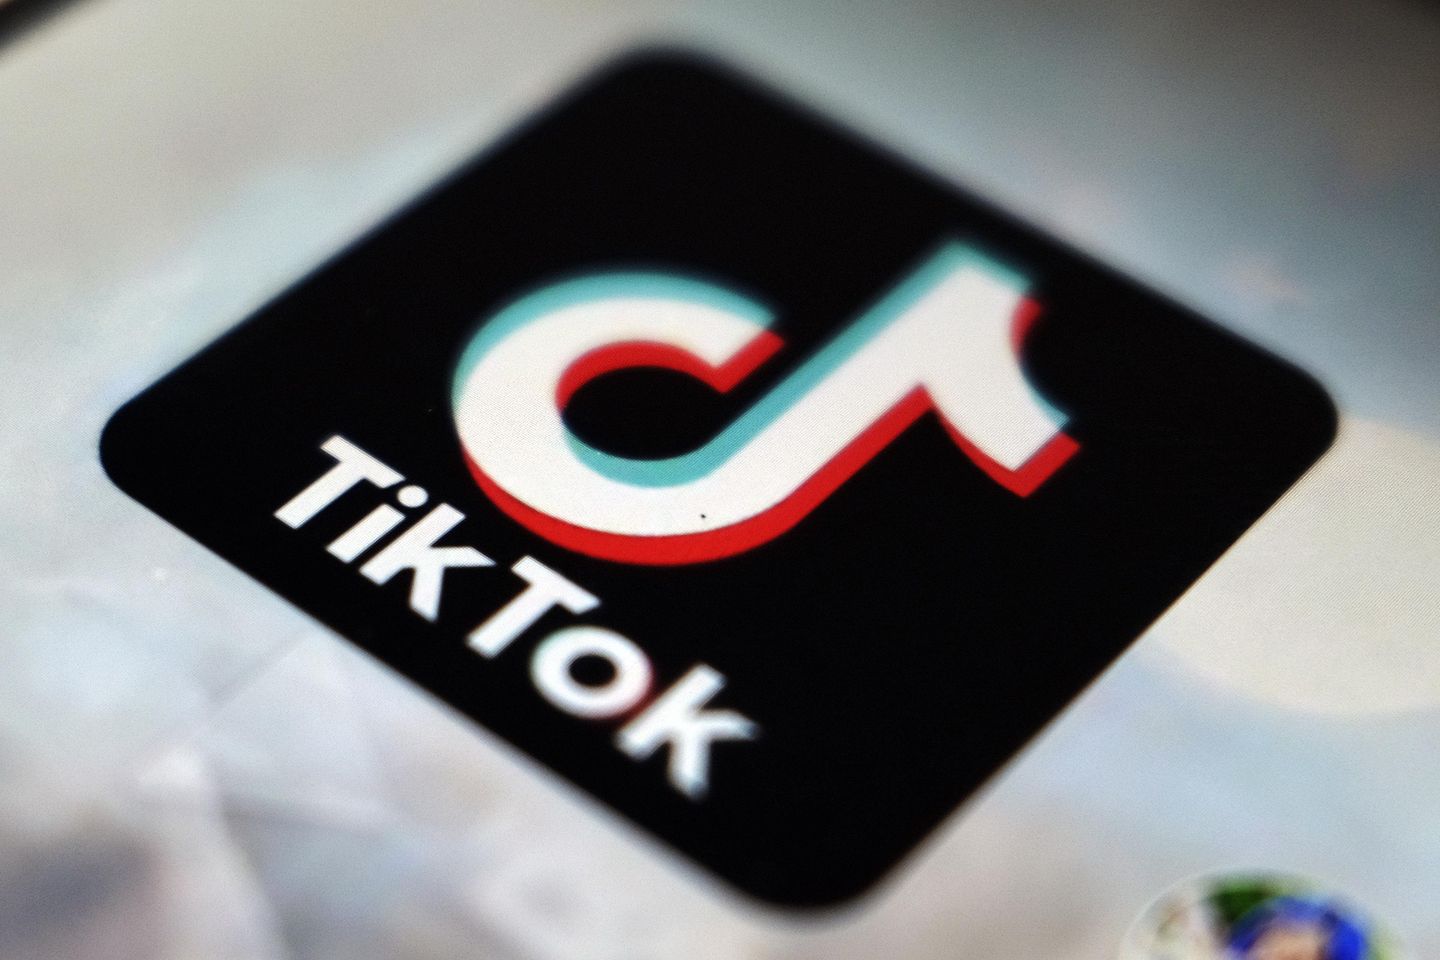 Texas plans sweeping ban of TikTok at all state agencies, universities